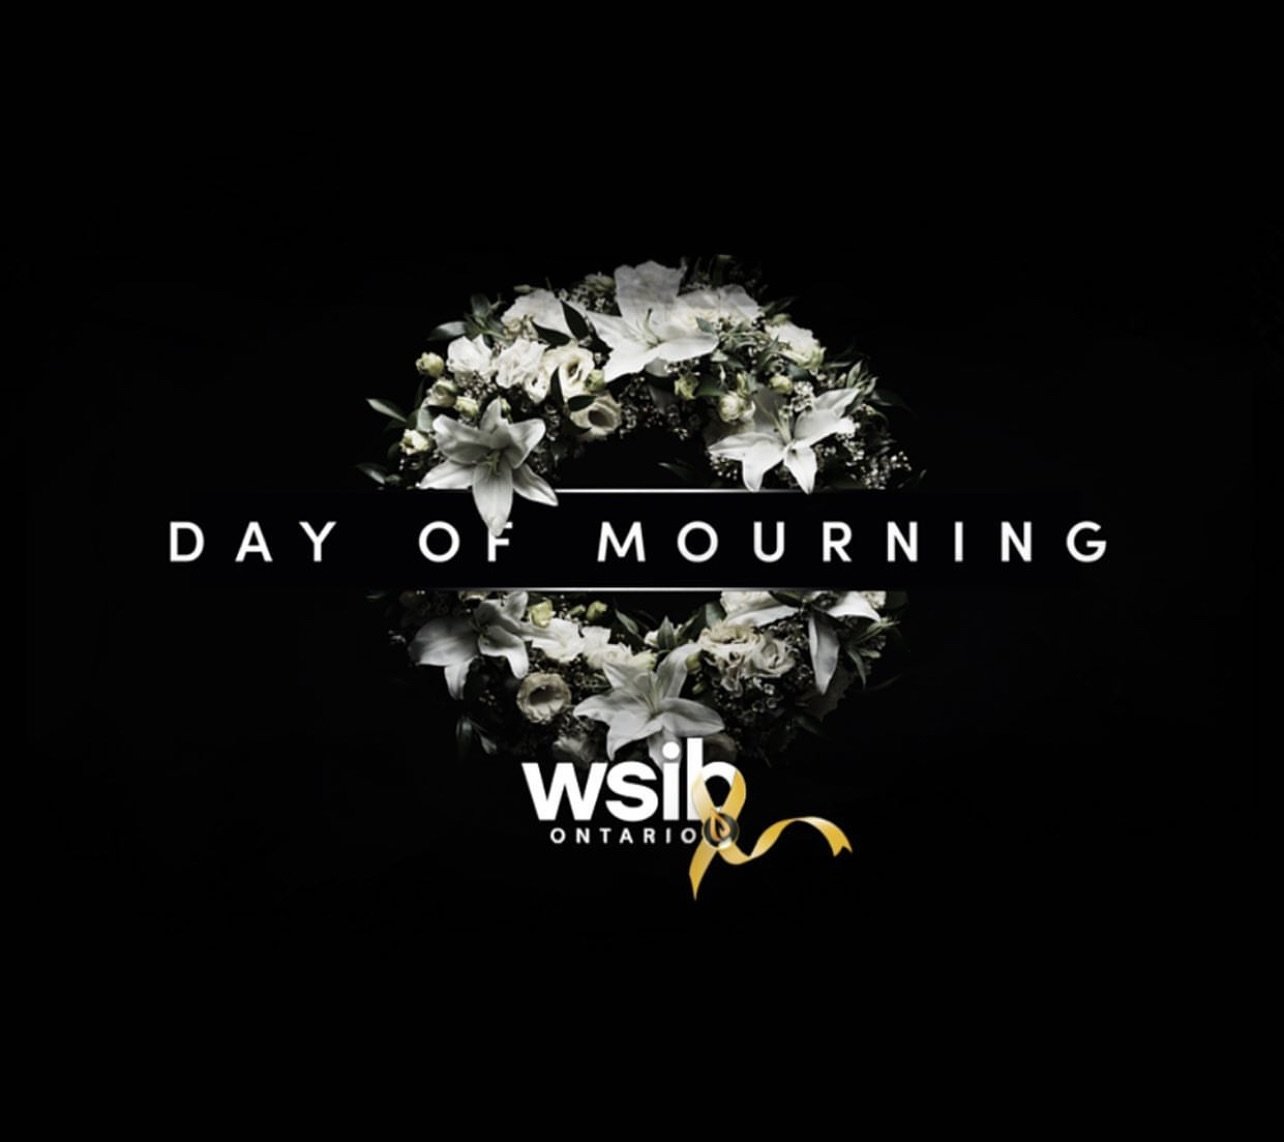 On April 28th the labour movement marks the annual Day of Mourning, honouring workers who have been killed or injured at work or suffered from occupational disease.

Today we remember them. 🙏

#dayofmourning #april28th #wsibdayofmourning #wsib